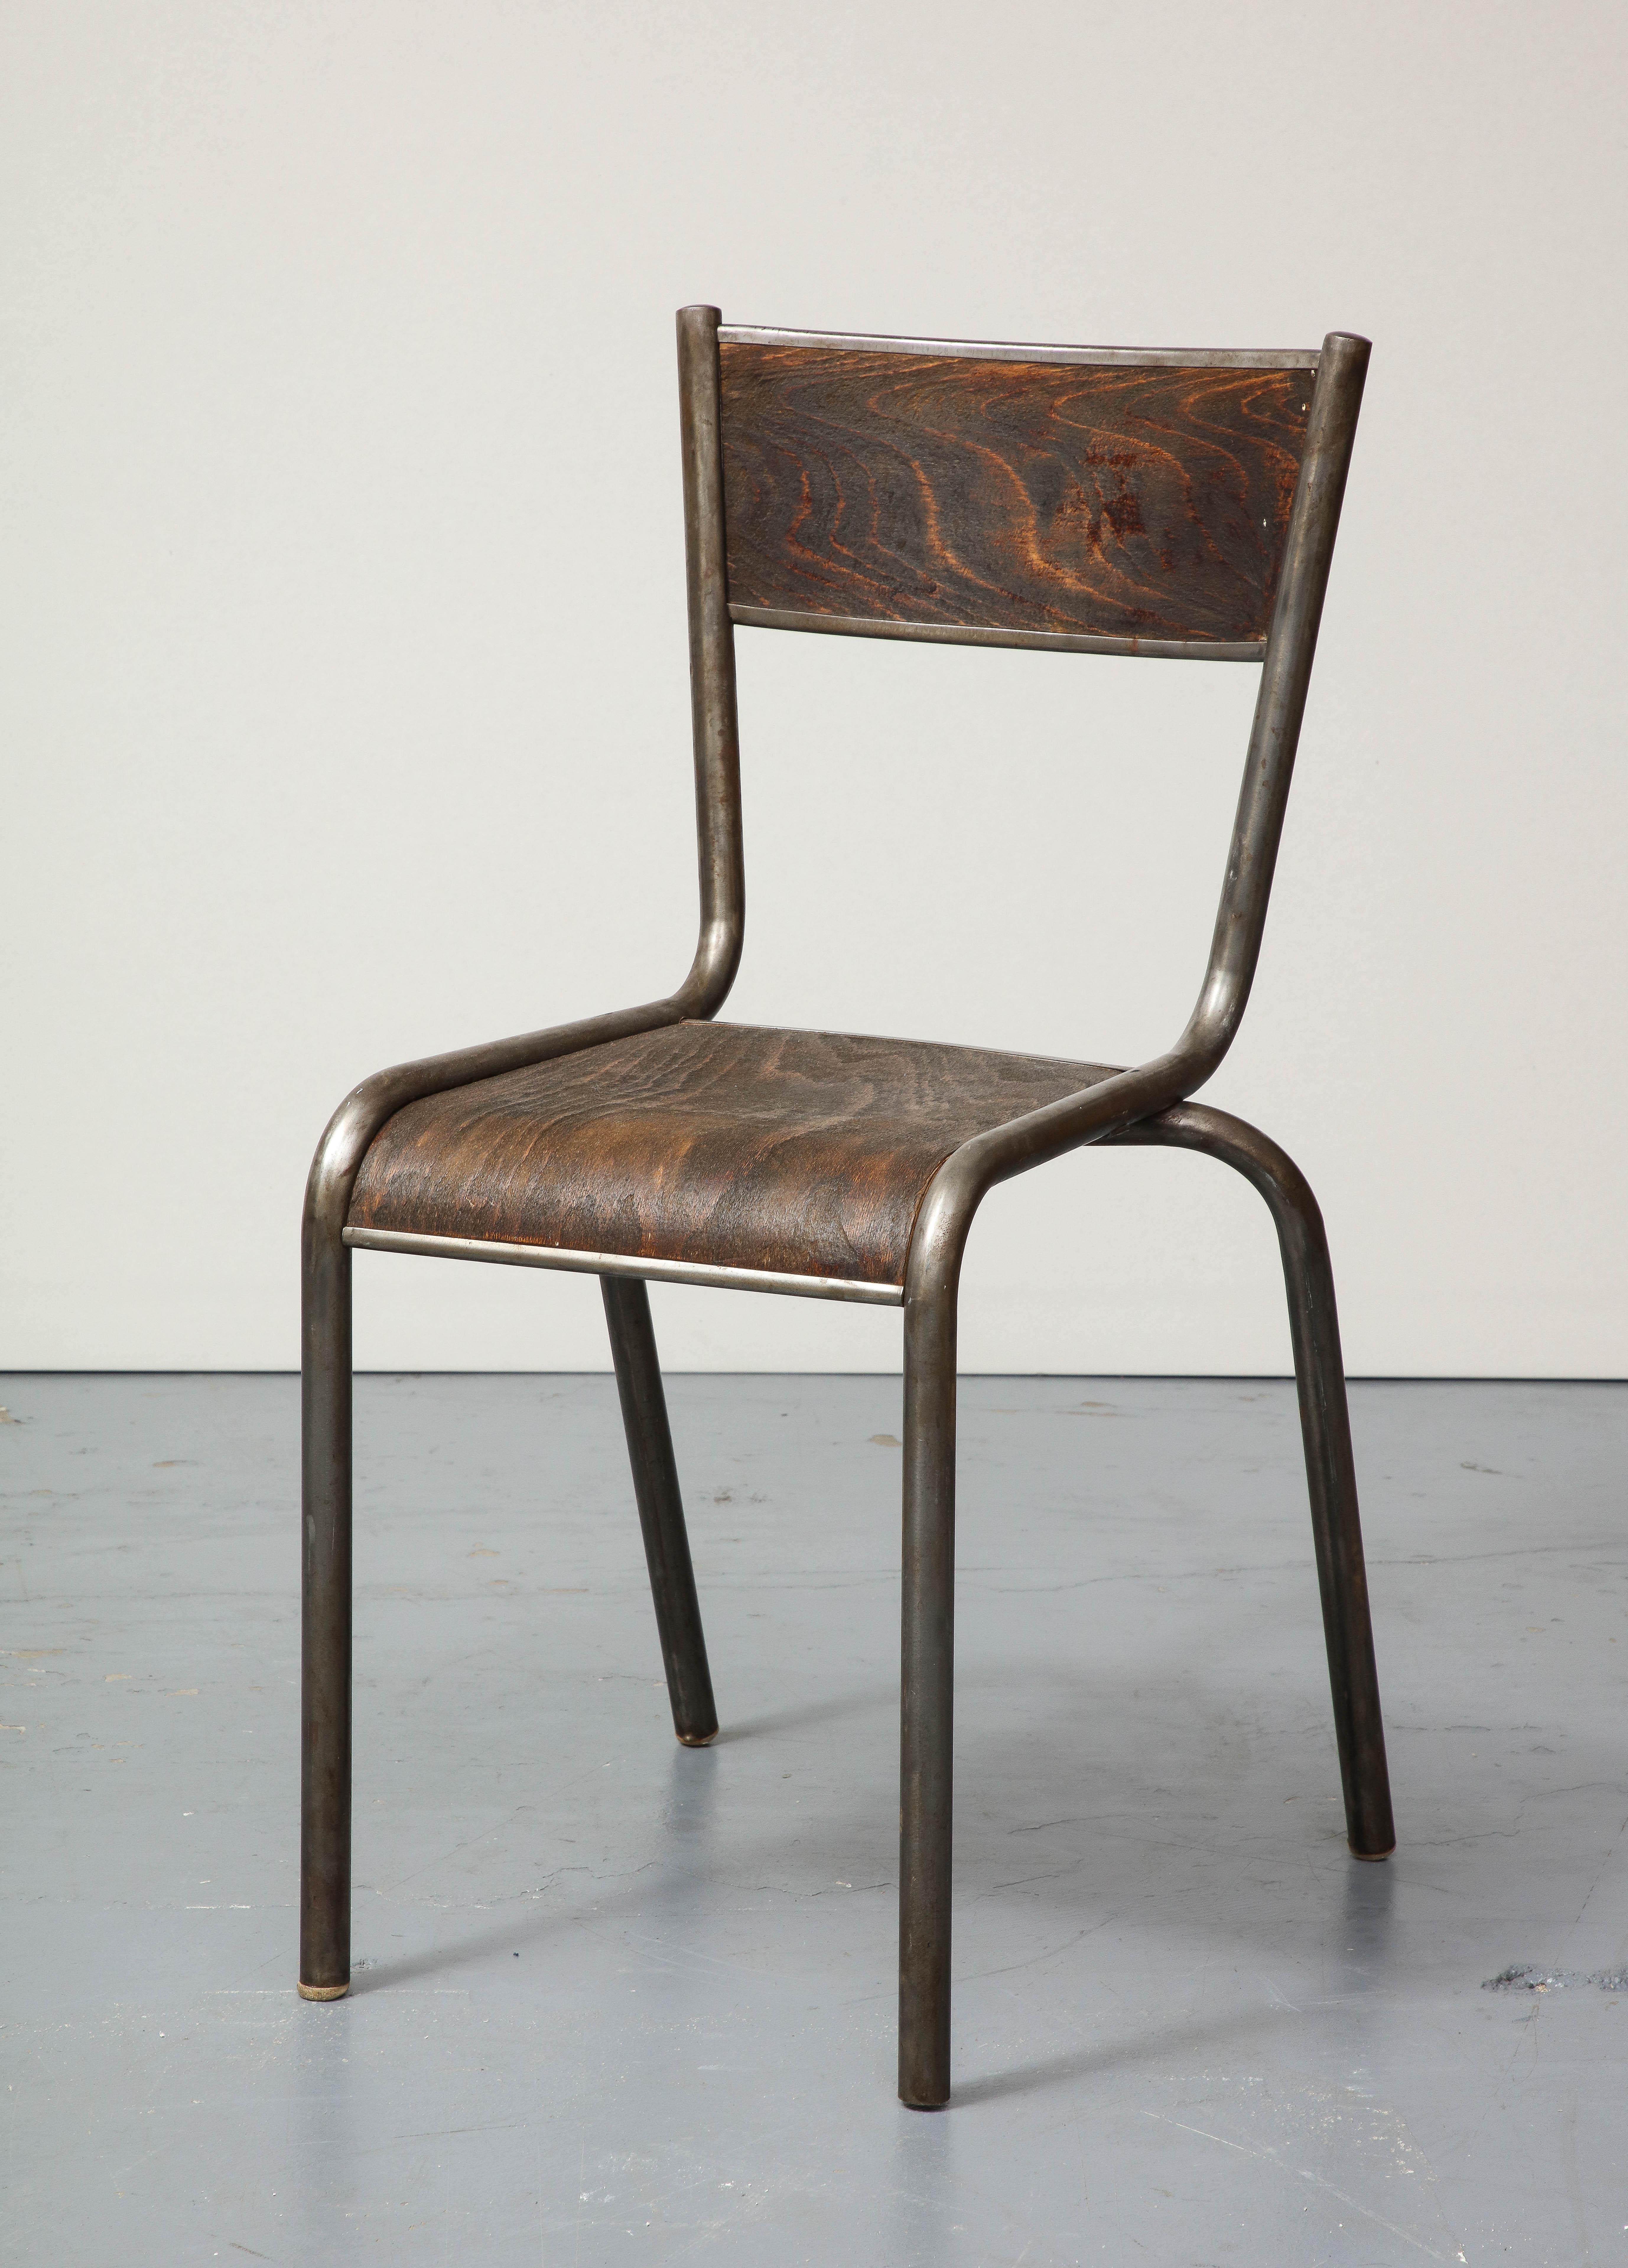 Rustic, beautifully patinated chair with tubular steel and bent wood.